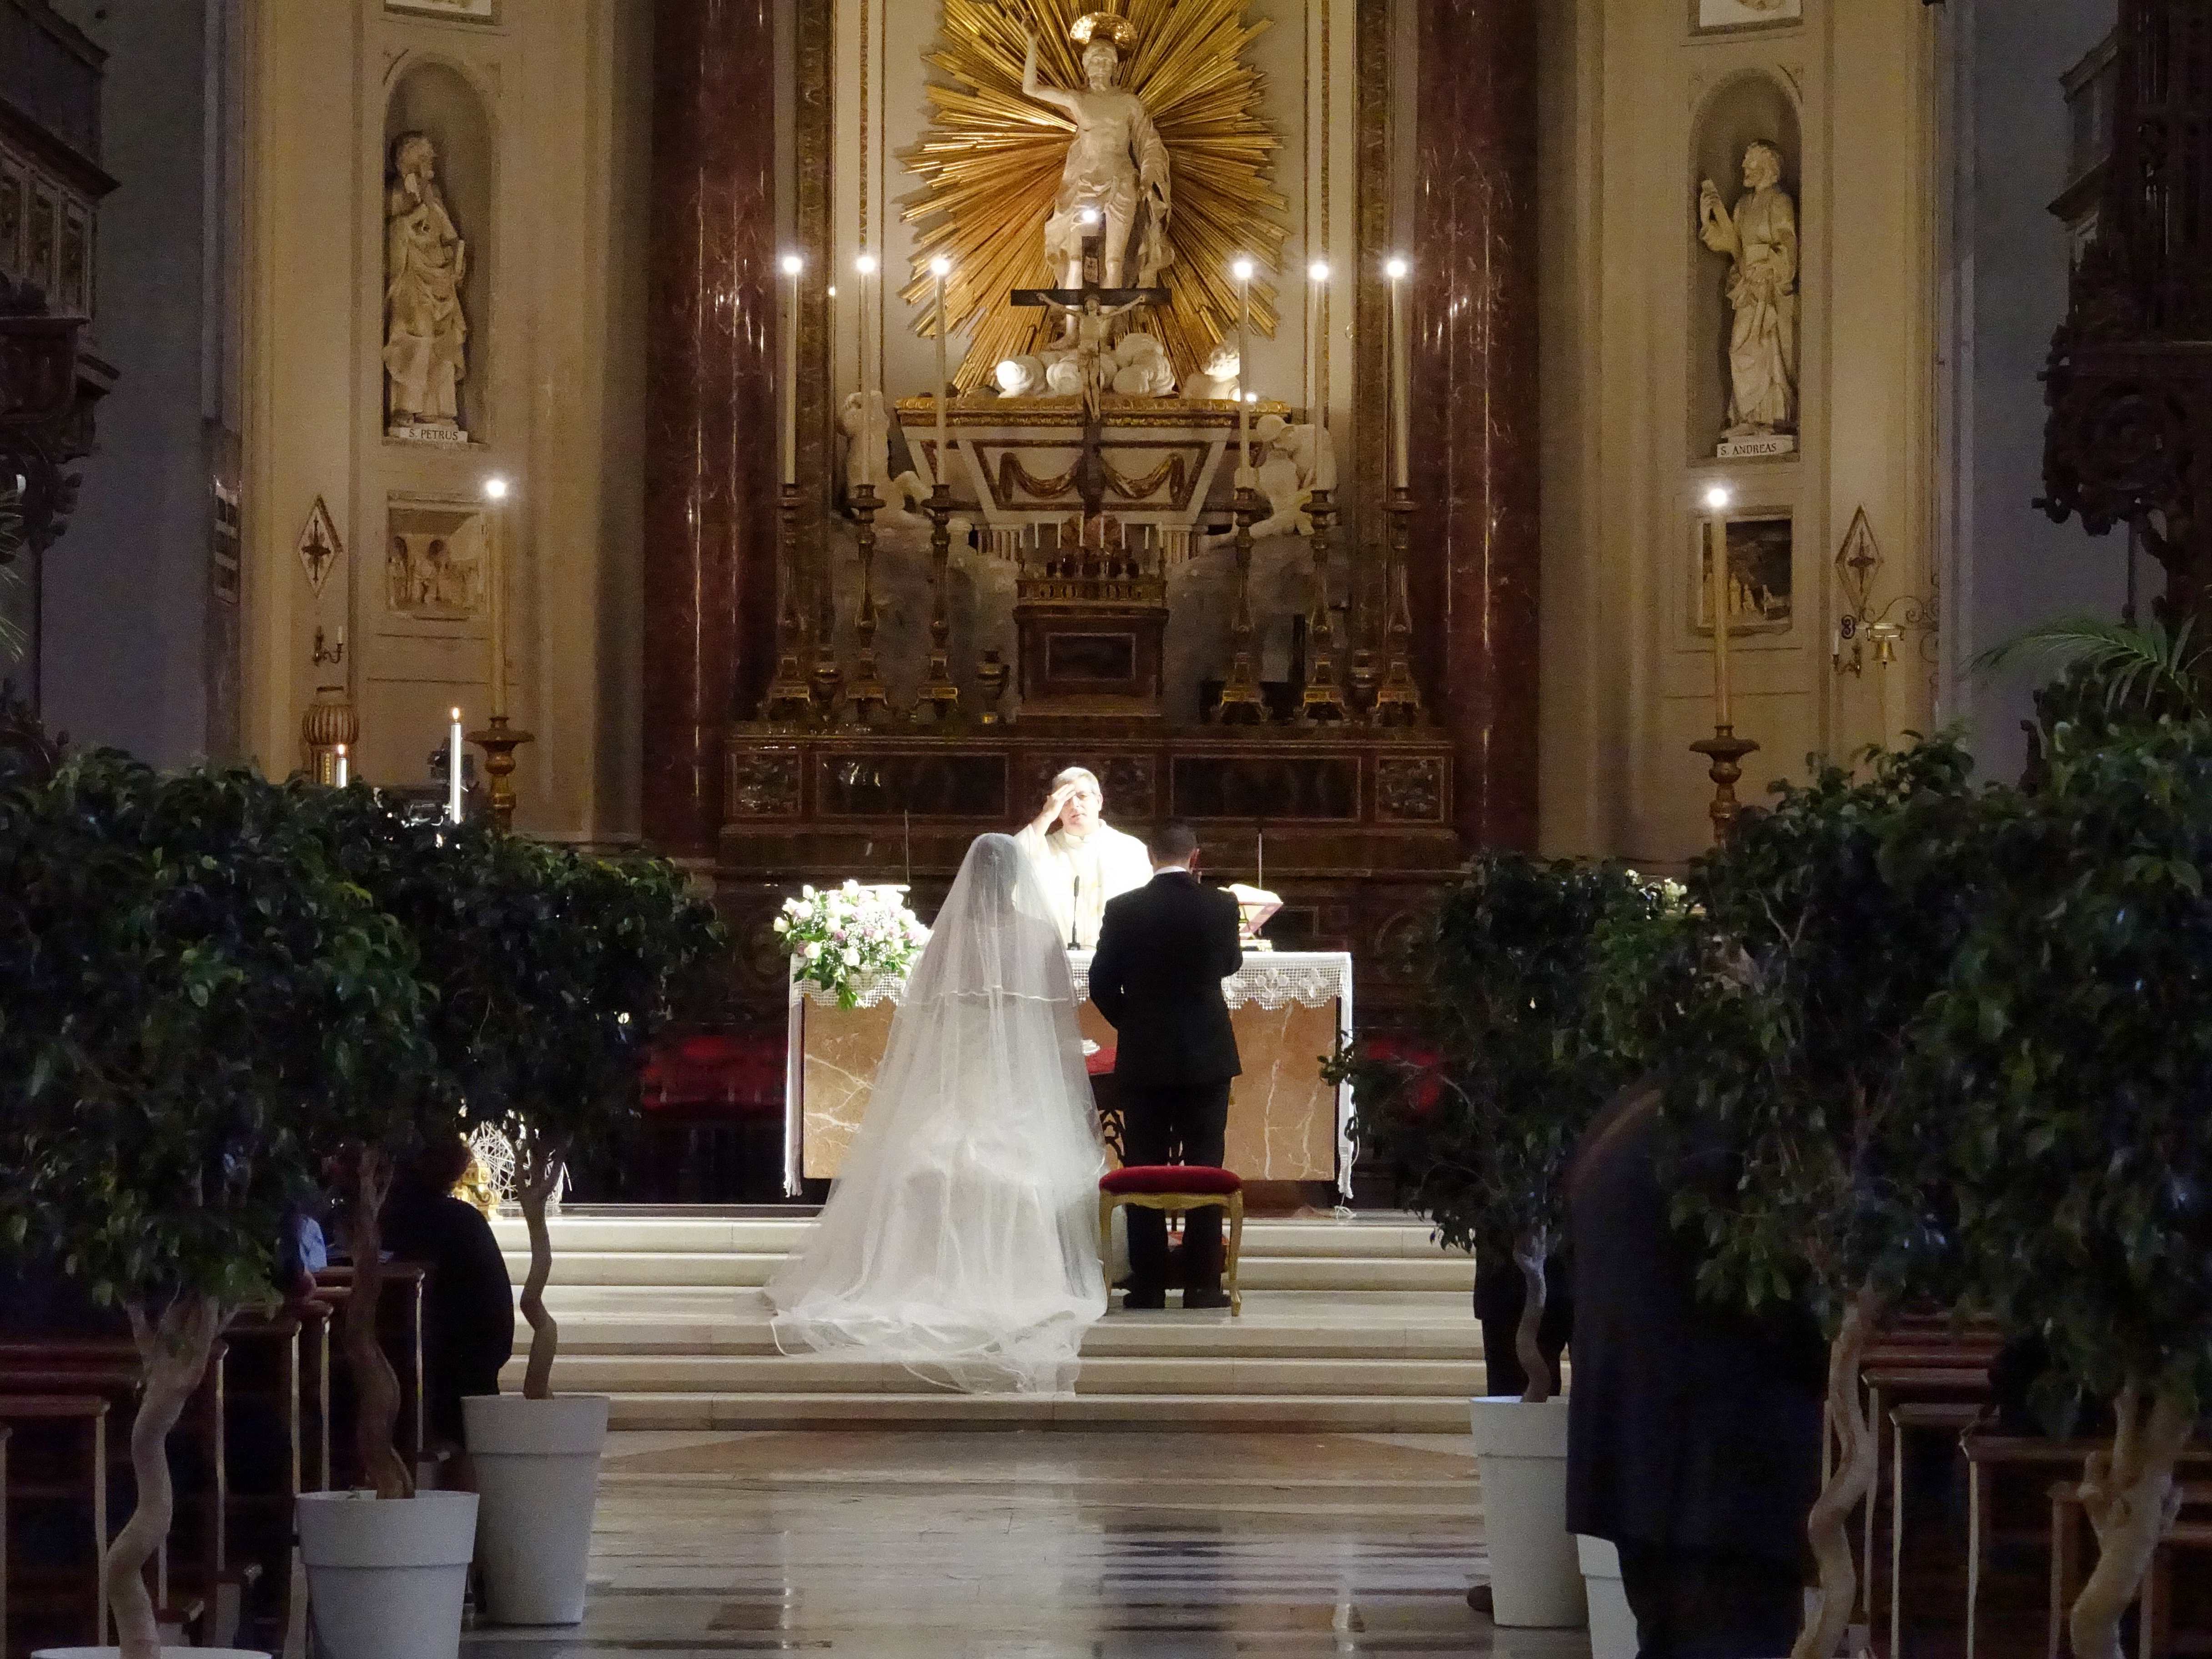 We came across a beautiful wedding ceremony inside the Cathedral